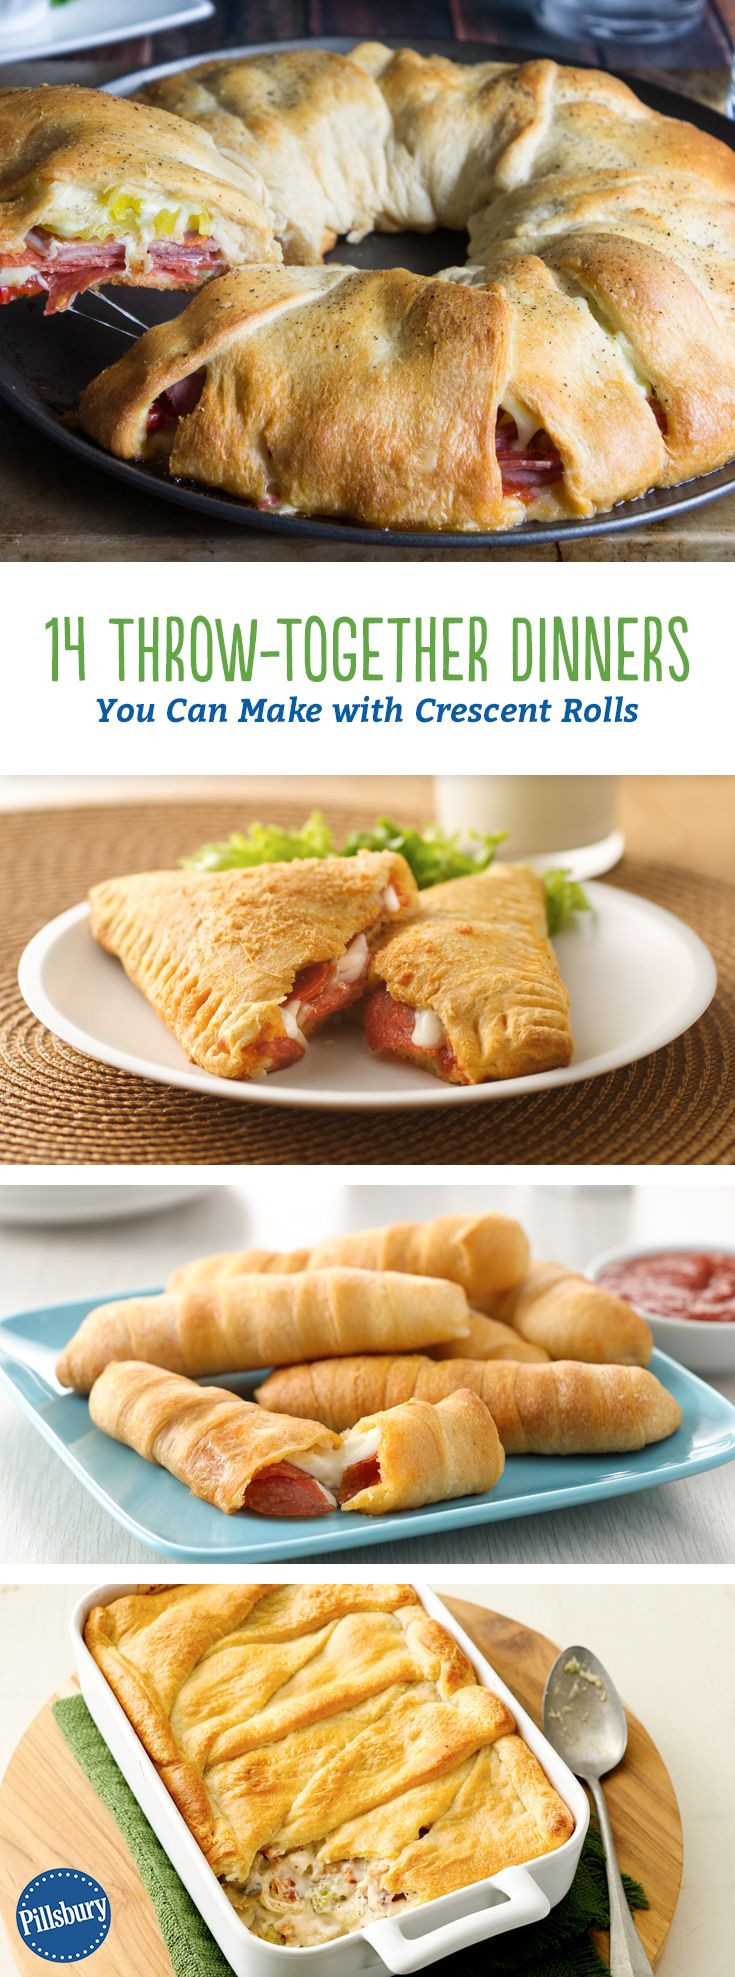 Crescent Roll Dinner Recipes
 17 Throw To her Dinners You Can Make with Crescent Rolls